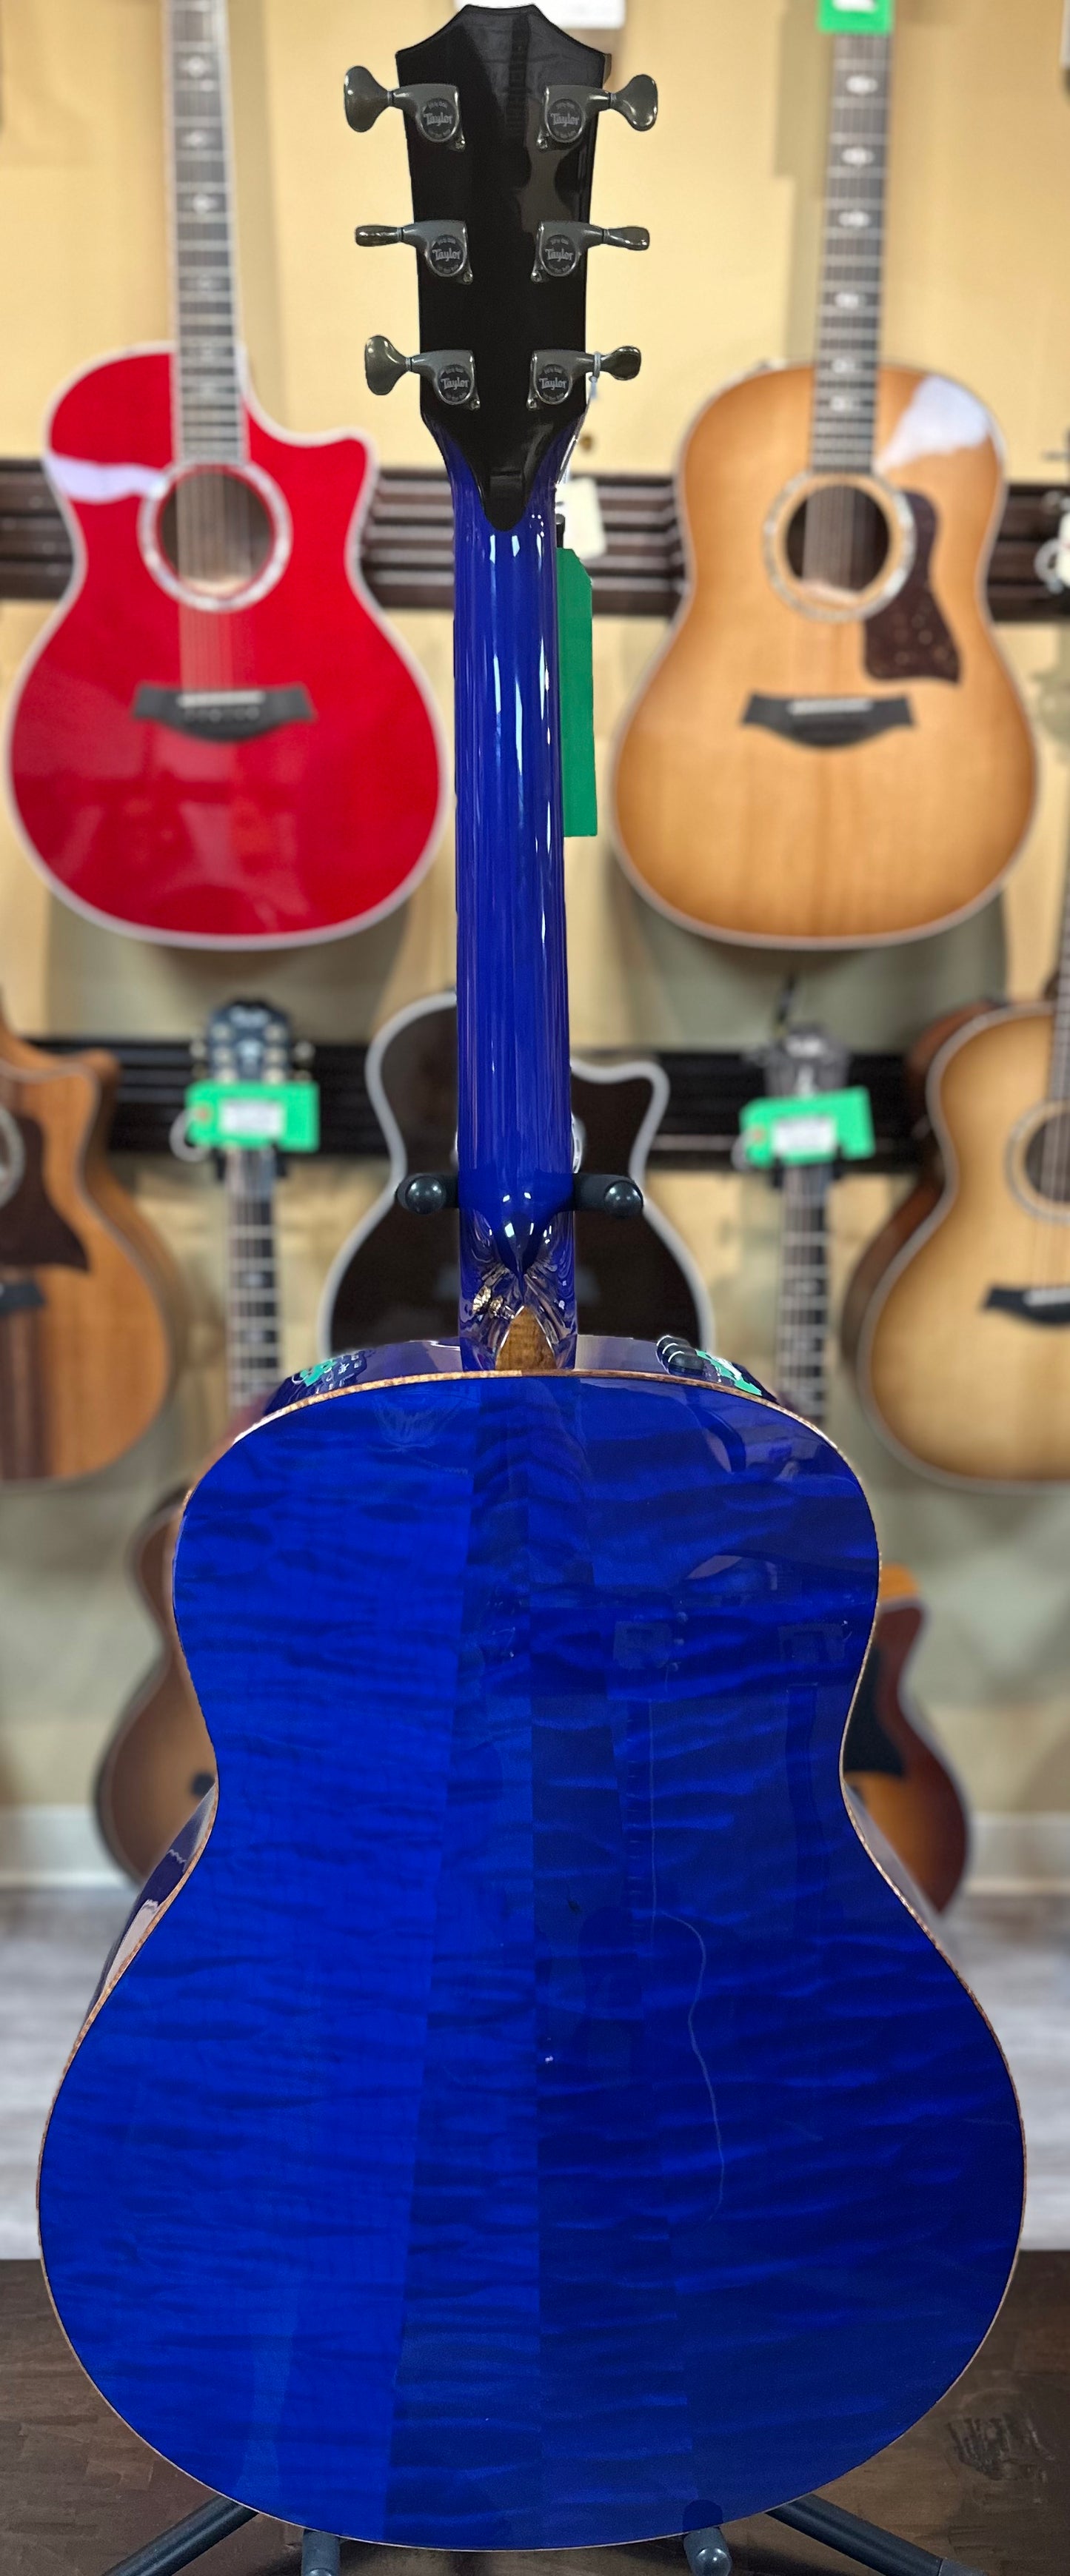 Full back. of Taylor Custom #3: C18e Grand Orchestra Lutz Spruce/Quilted Maple Royal Blue w/case